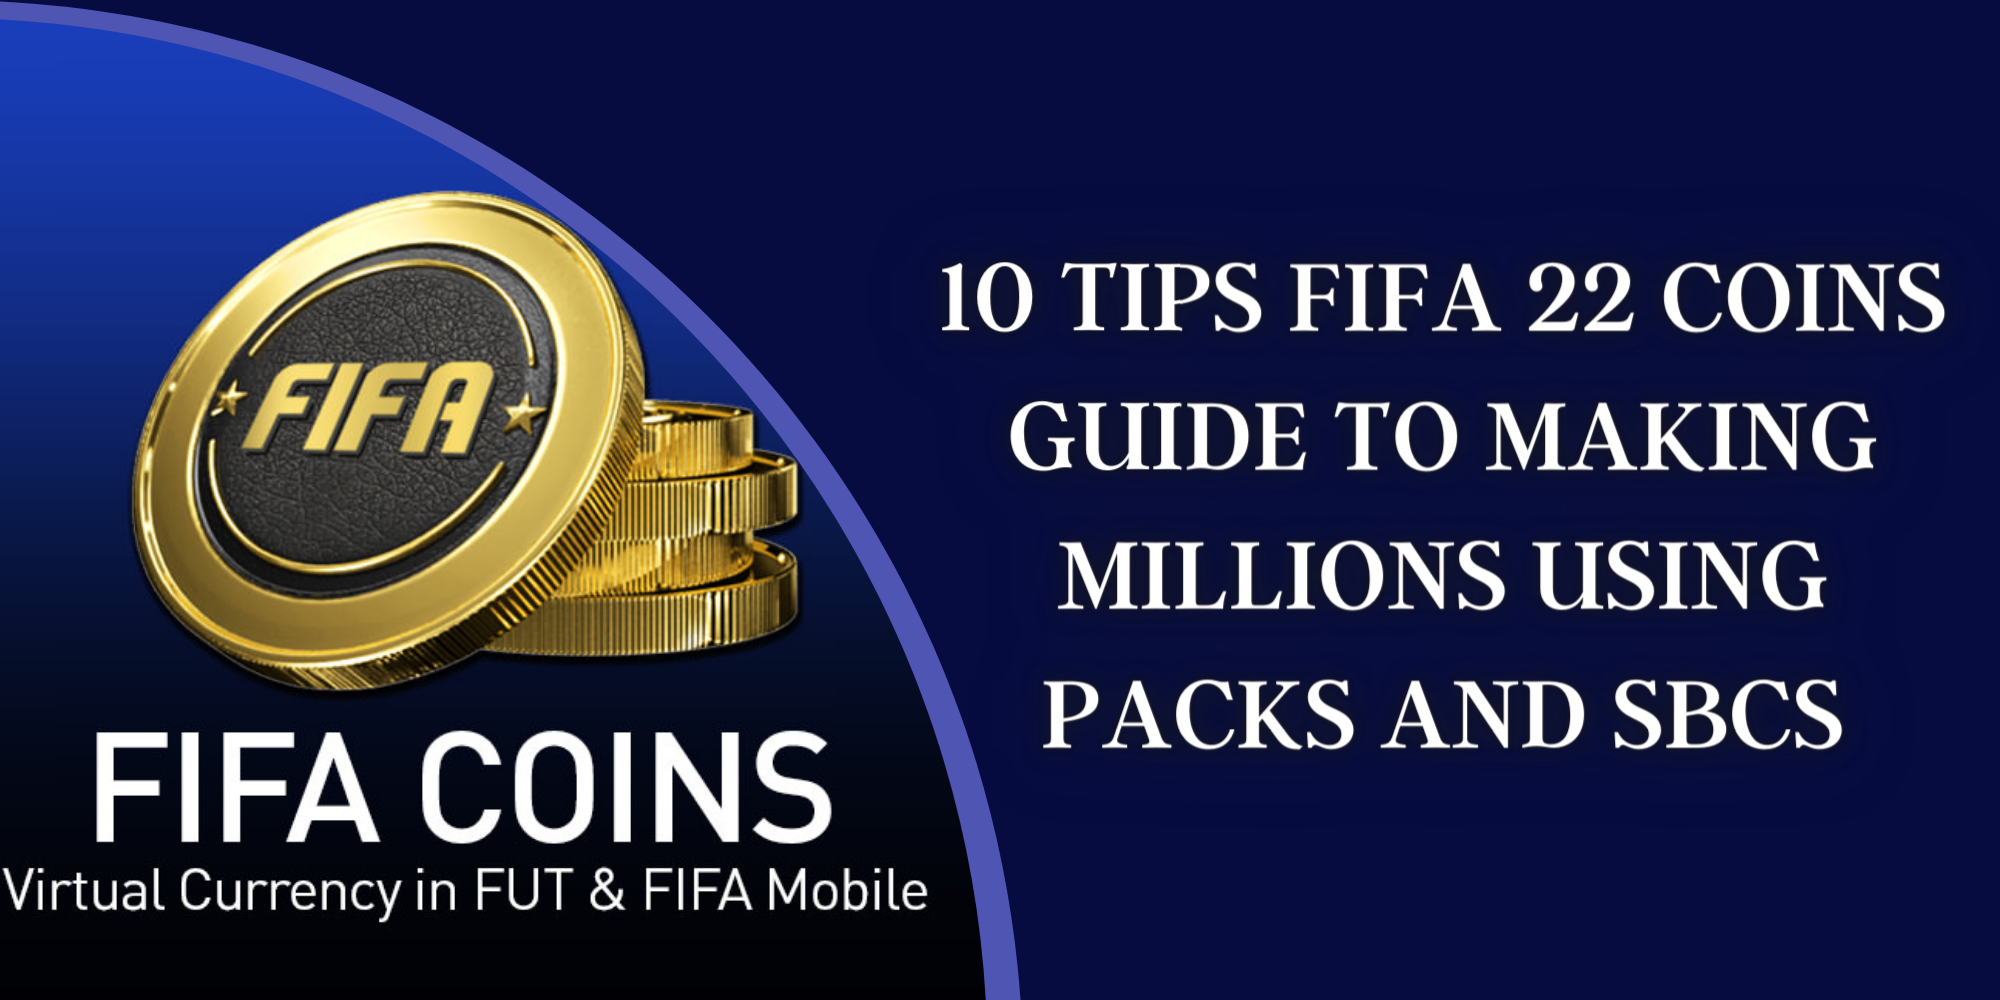 10 Tips: FIFA 22 coins guide to making millions using packs and SBCs